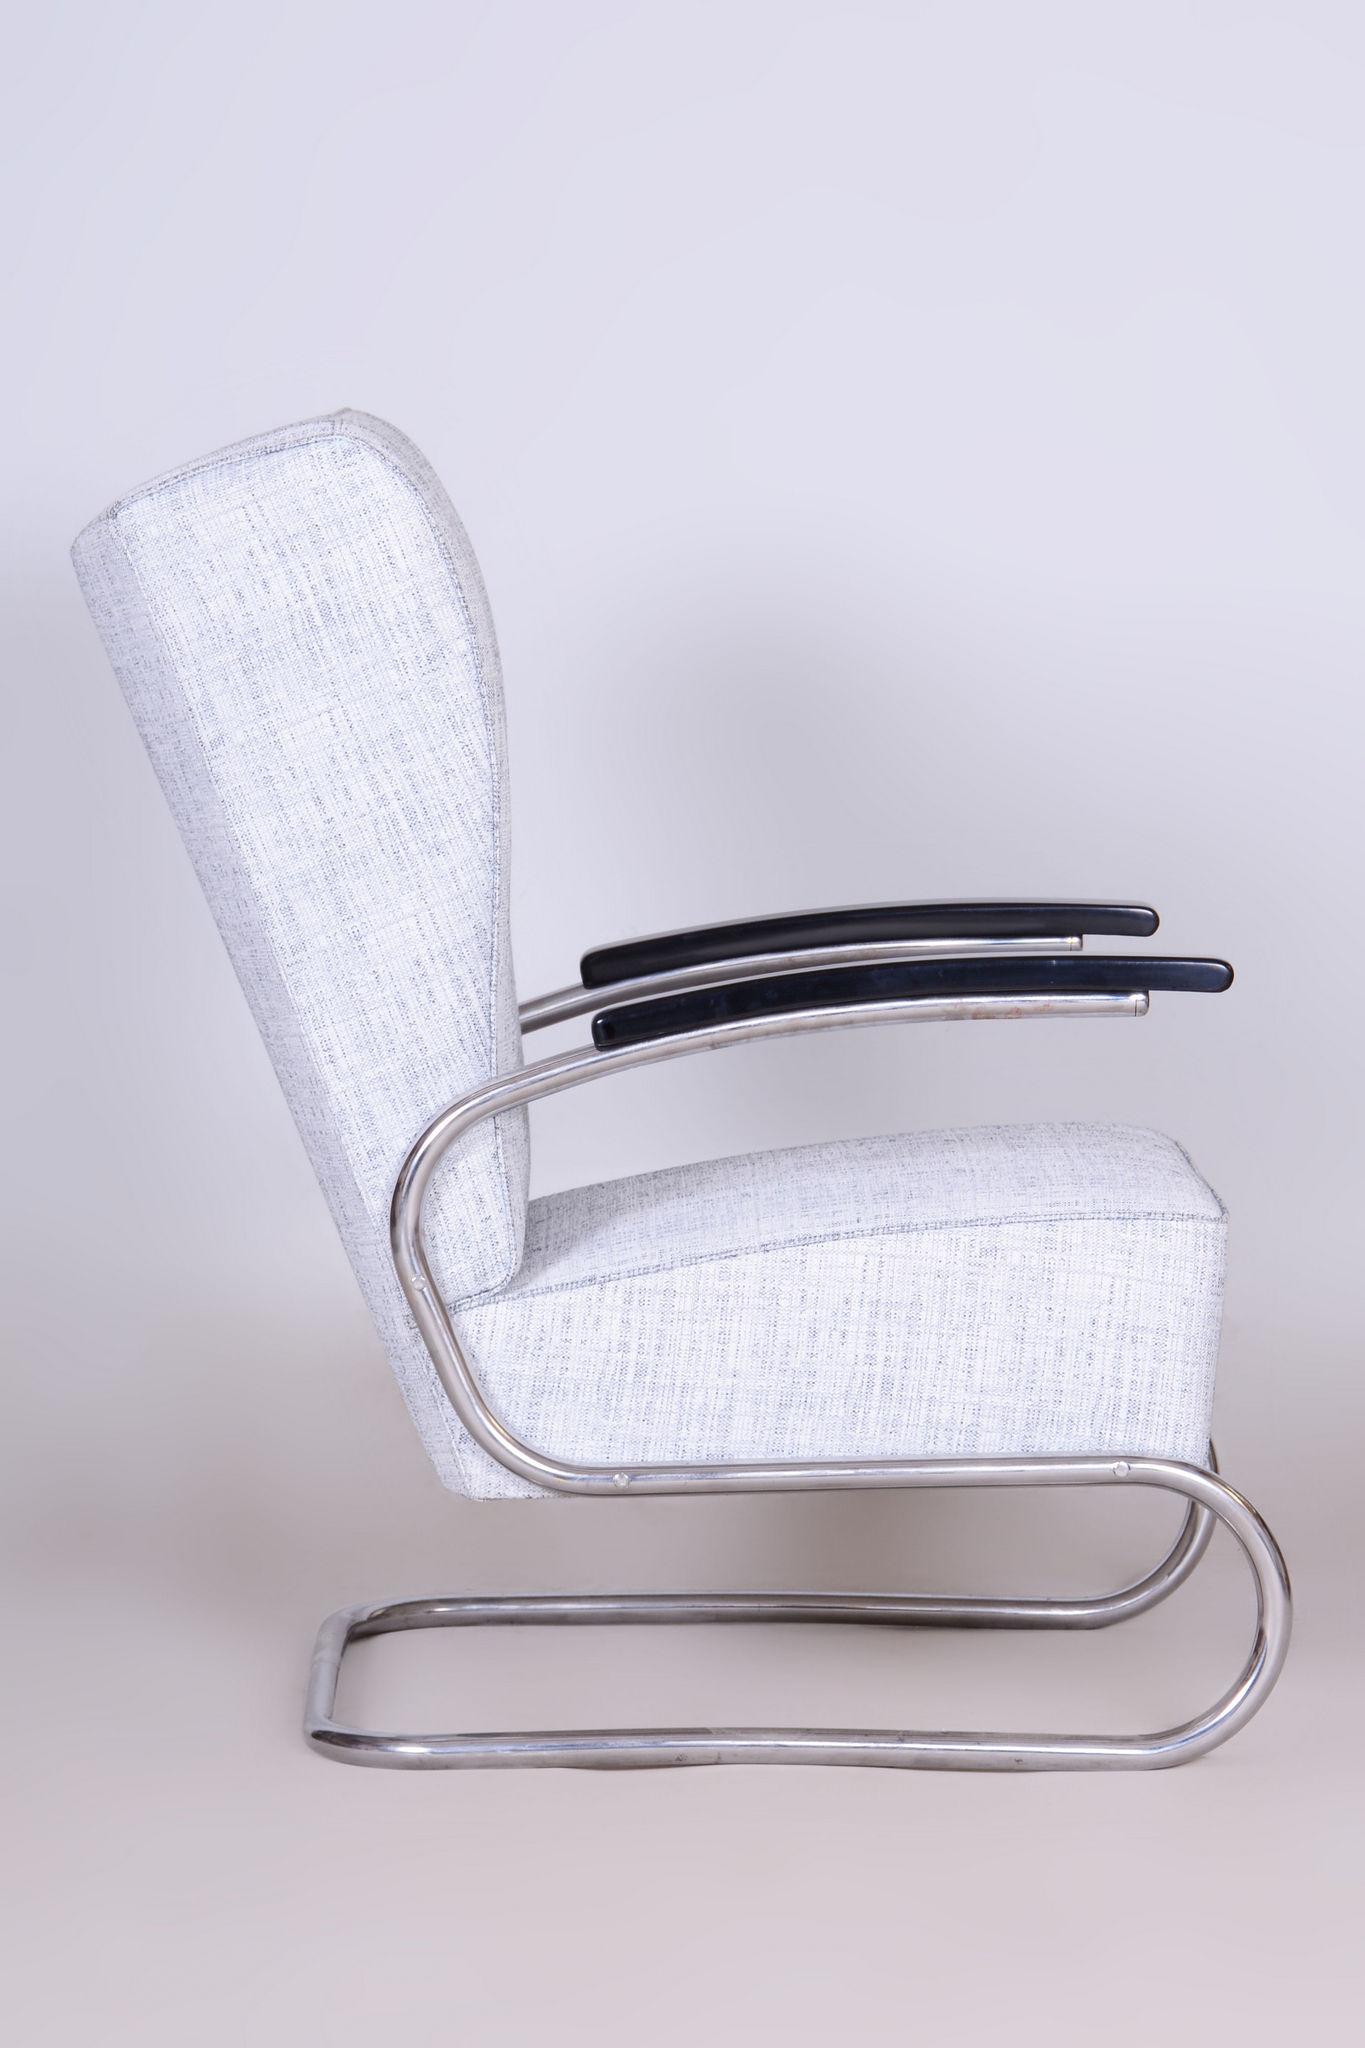 Restored Bauhaus Armchair by Kovona, Chrom-Plated Steel, Germany, 1930s For Sale 2